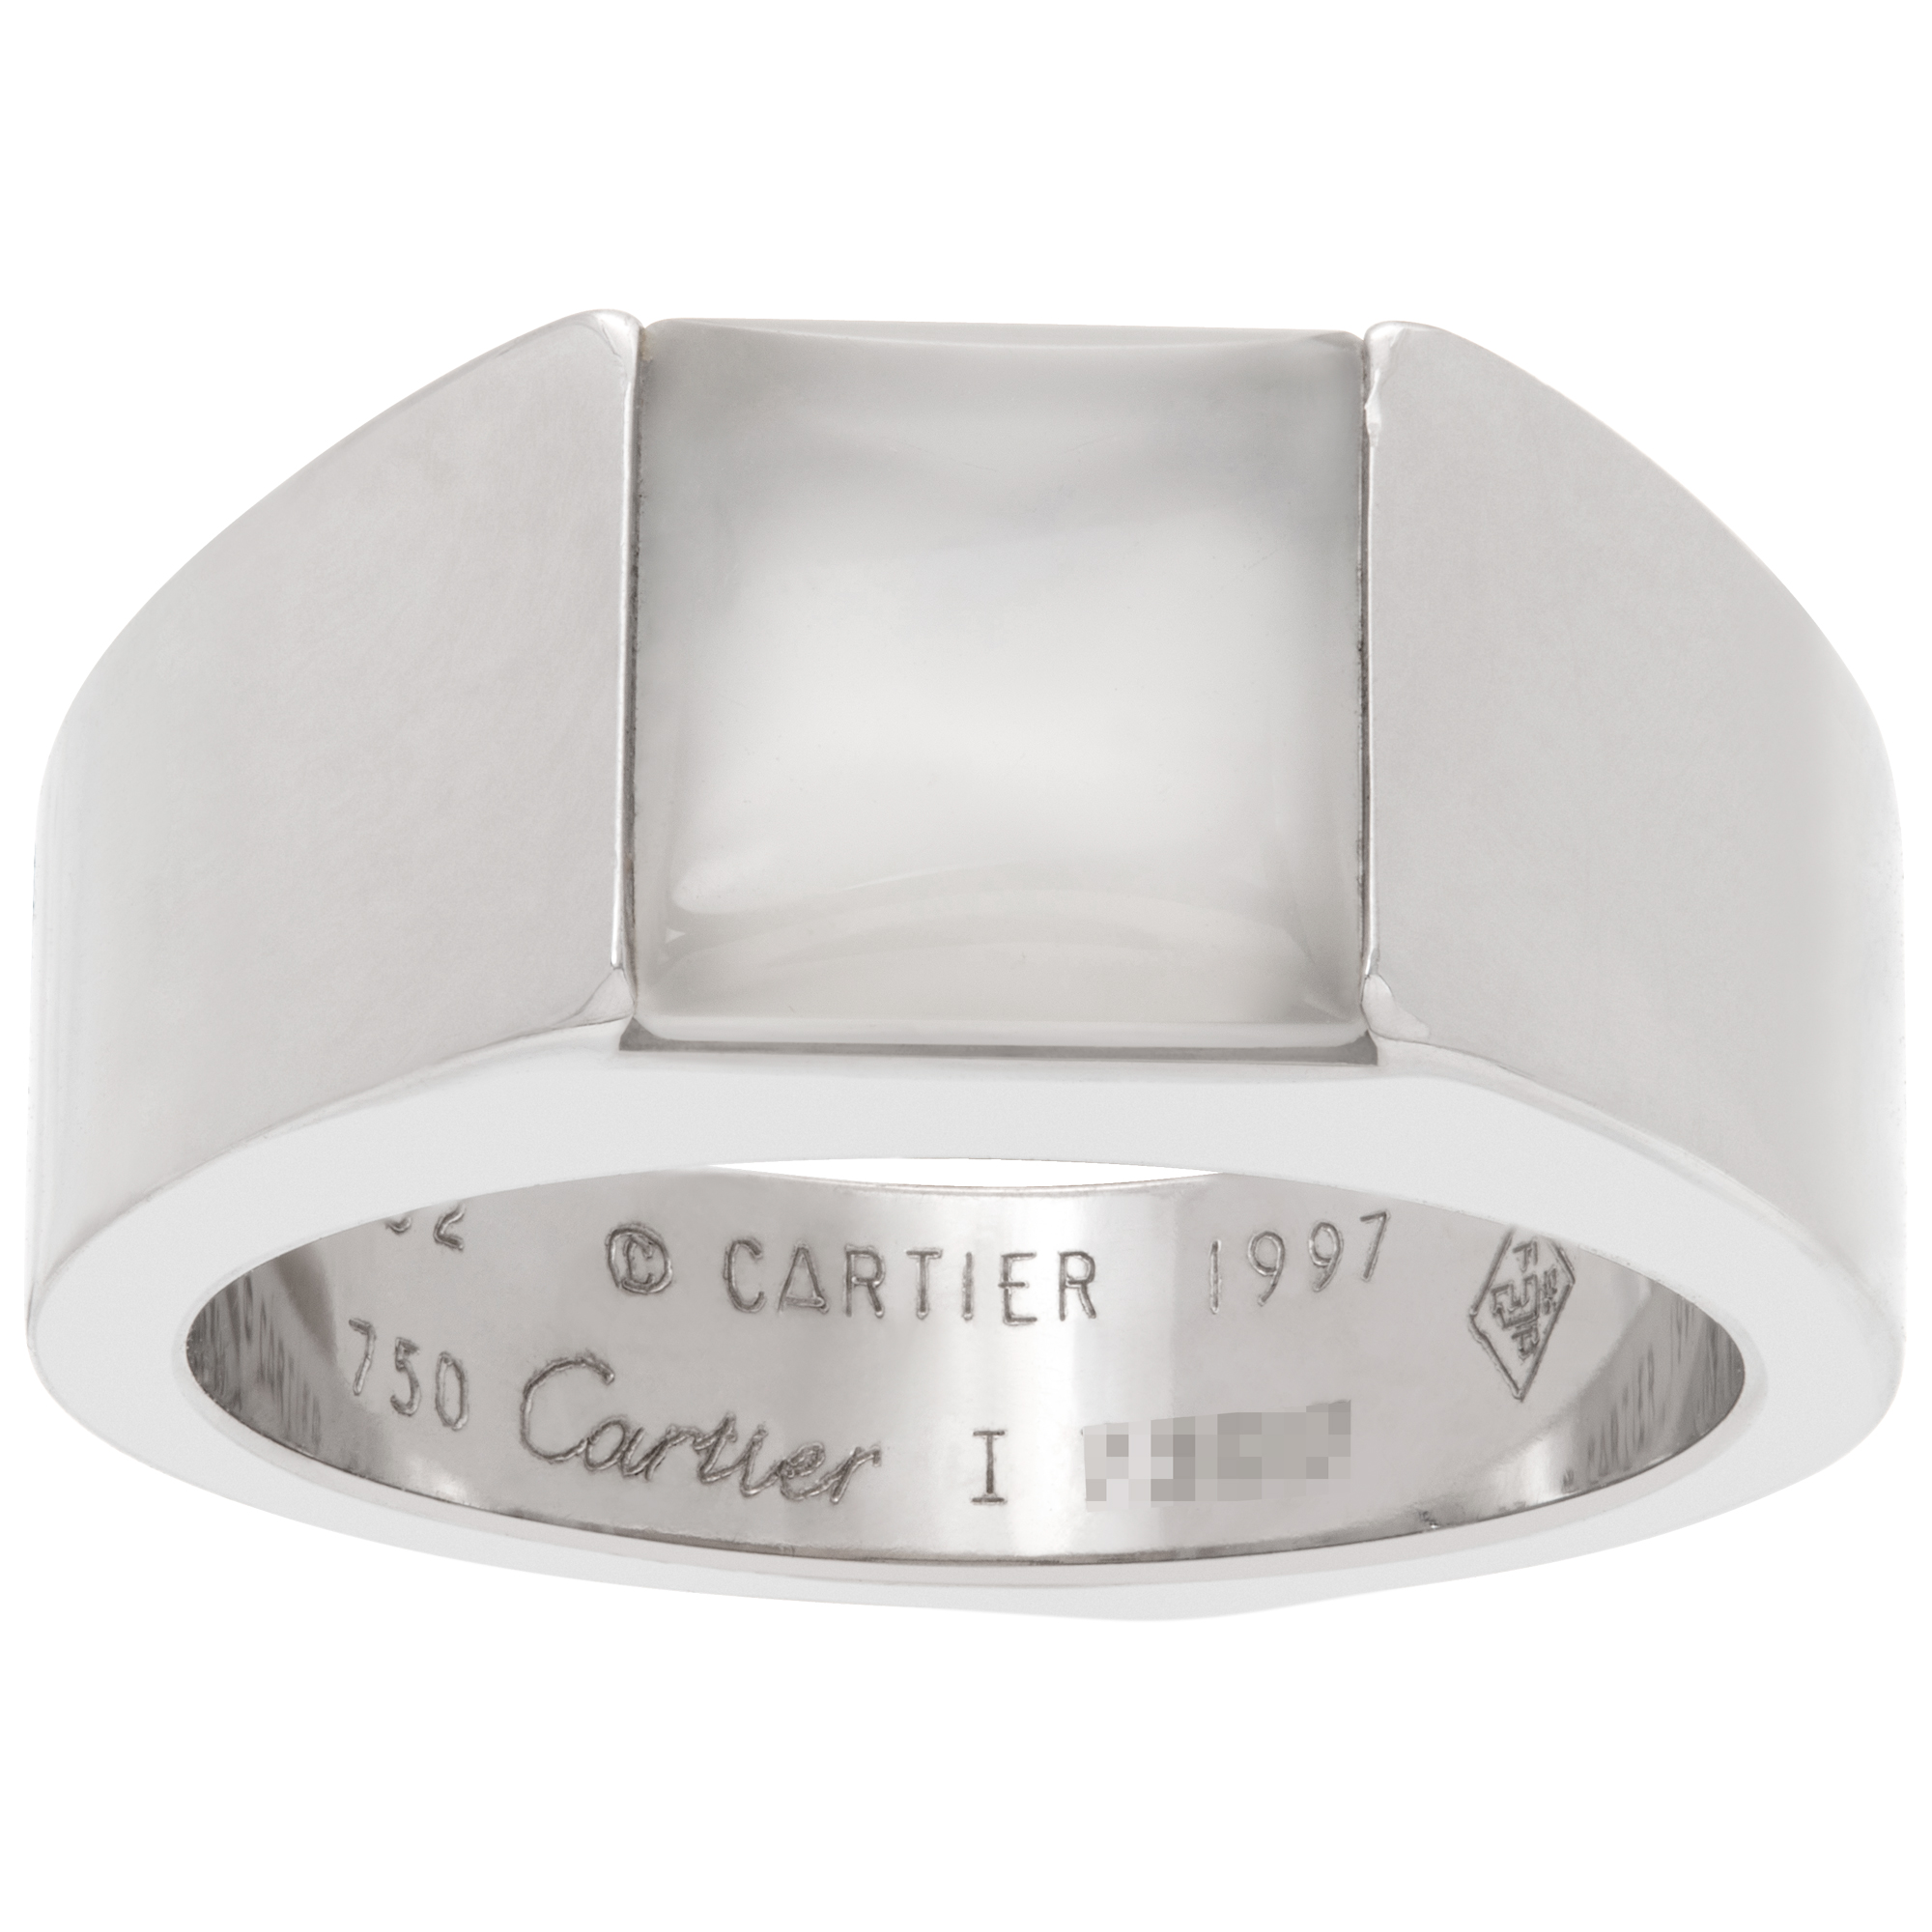 Cartier Tank ring in 18k white gold with moonstone image 1